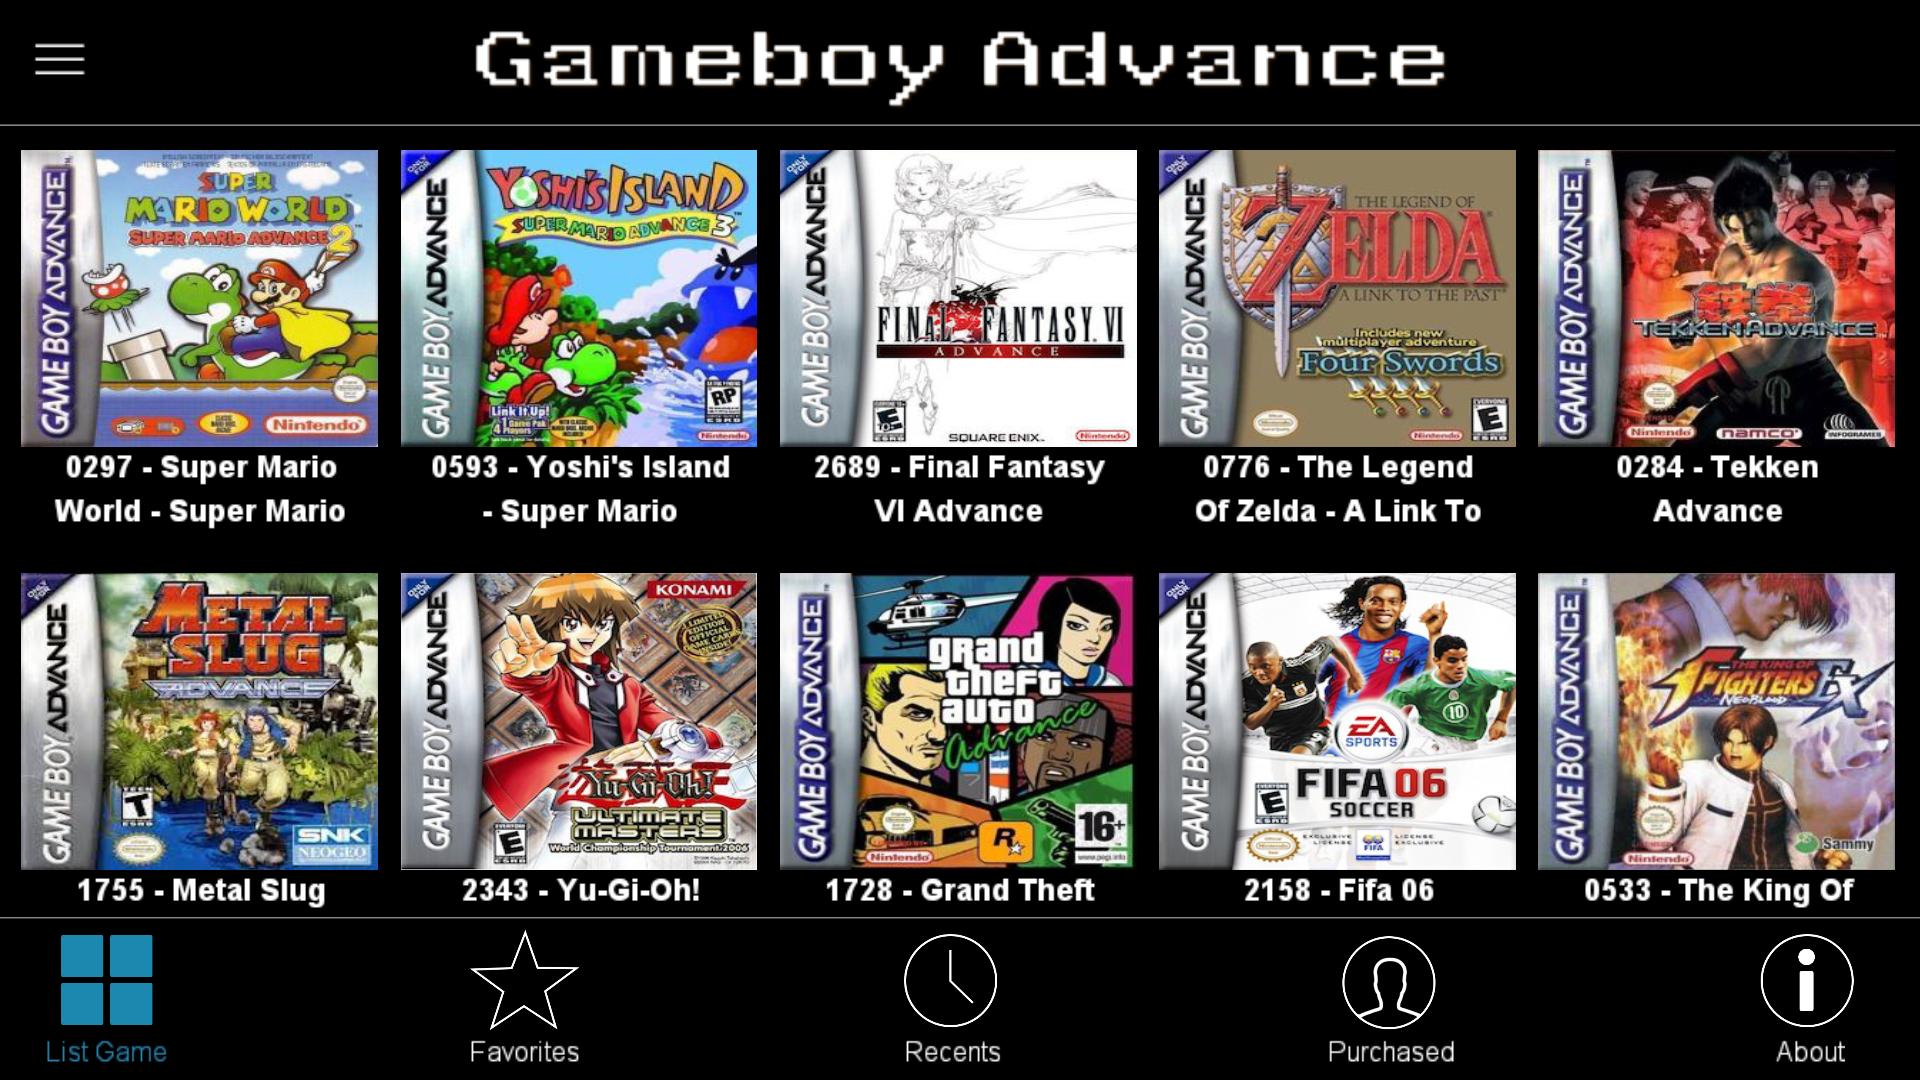 GBA Emulator - Gameboy Advance - Arcade Retro for Android - APK Download